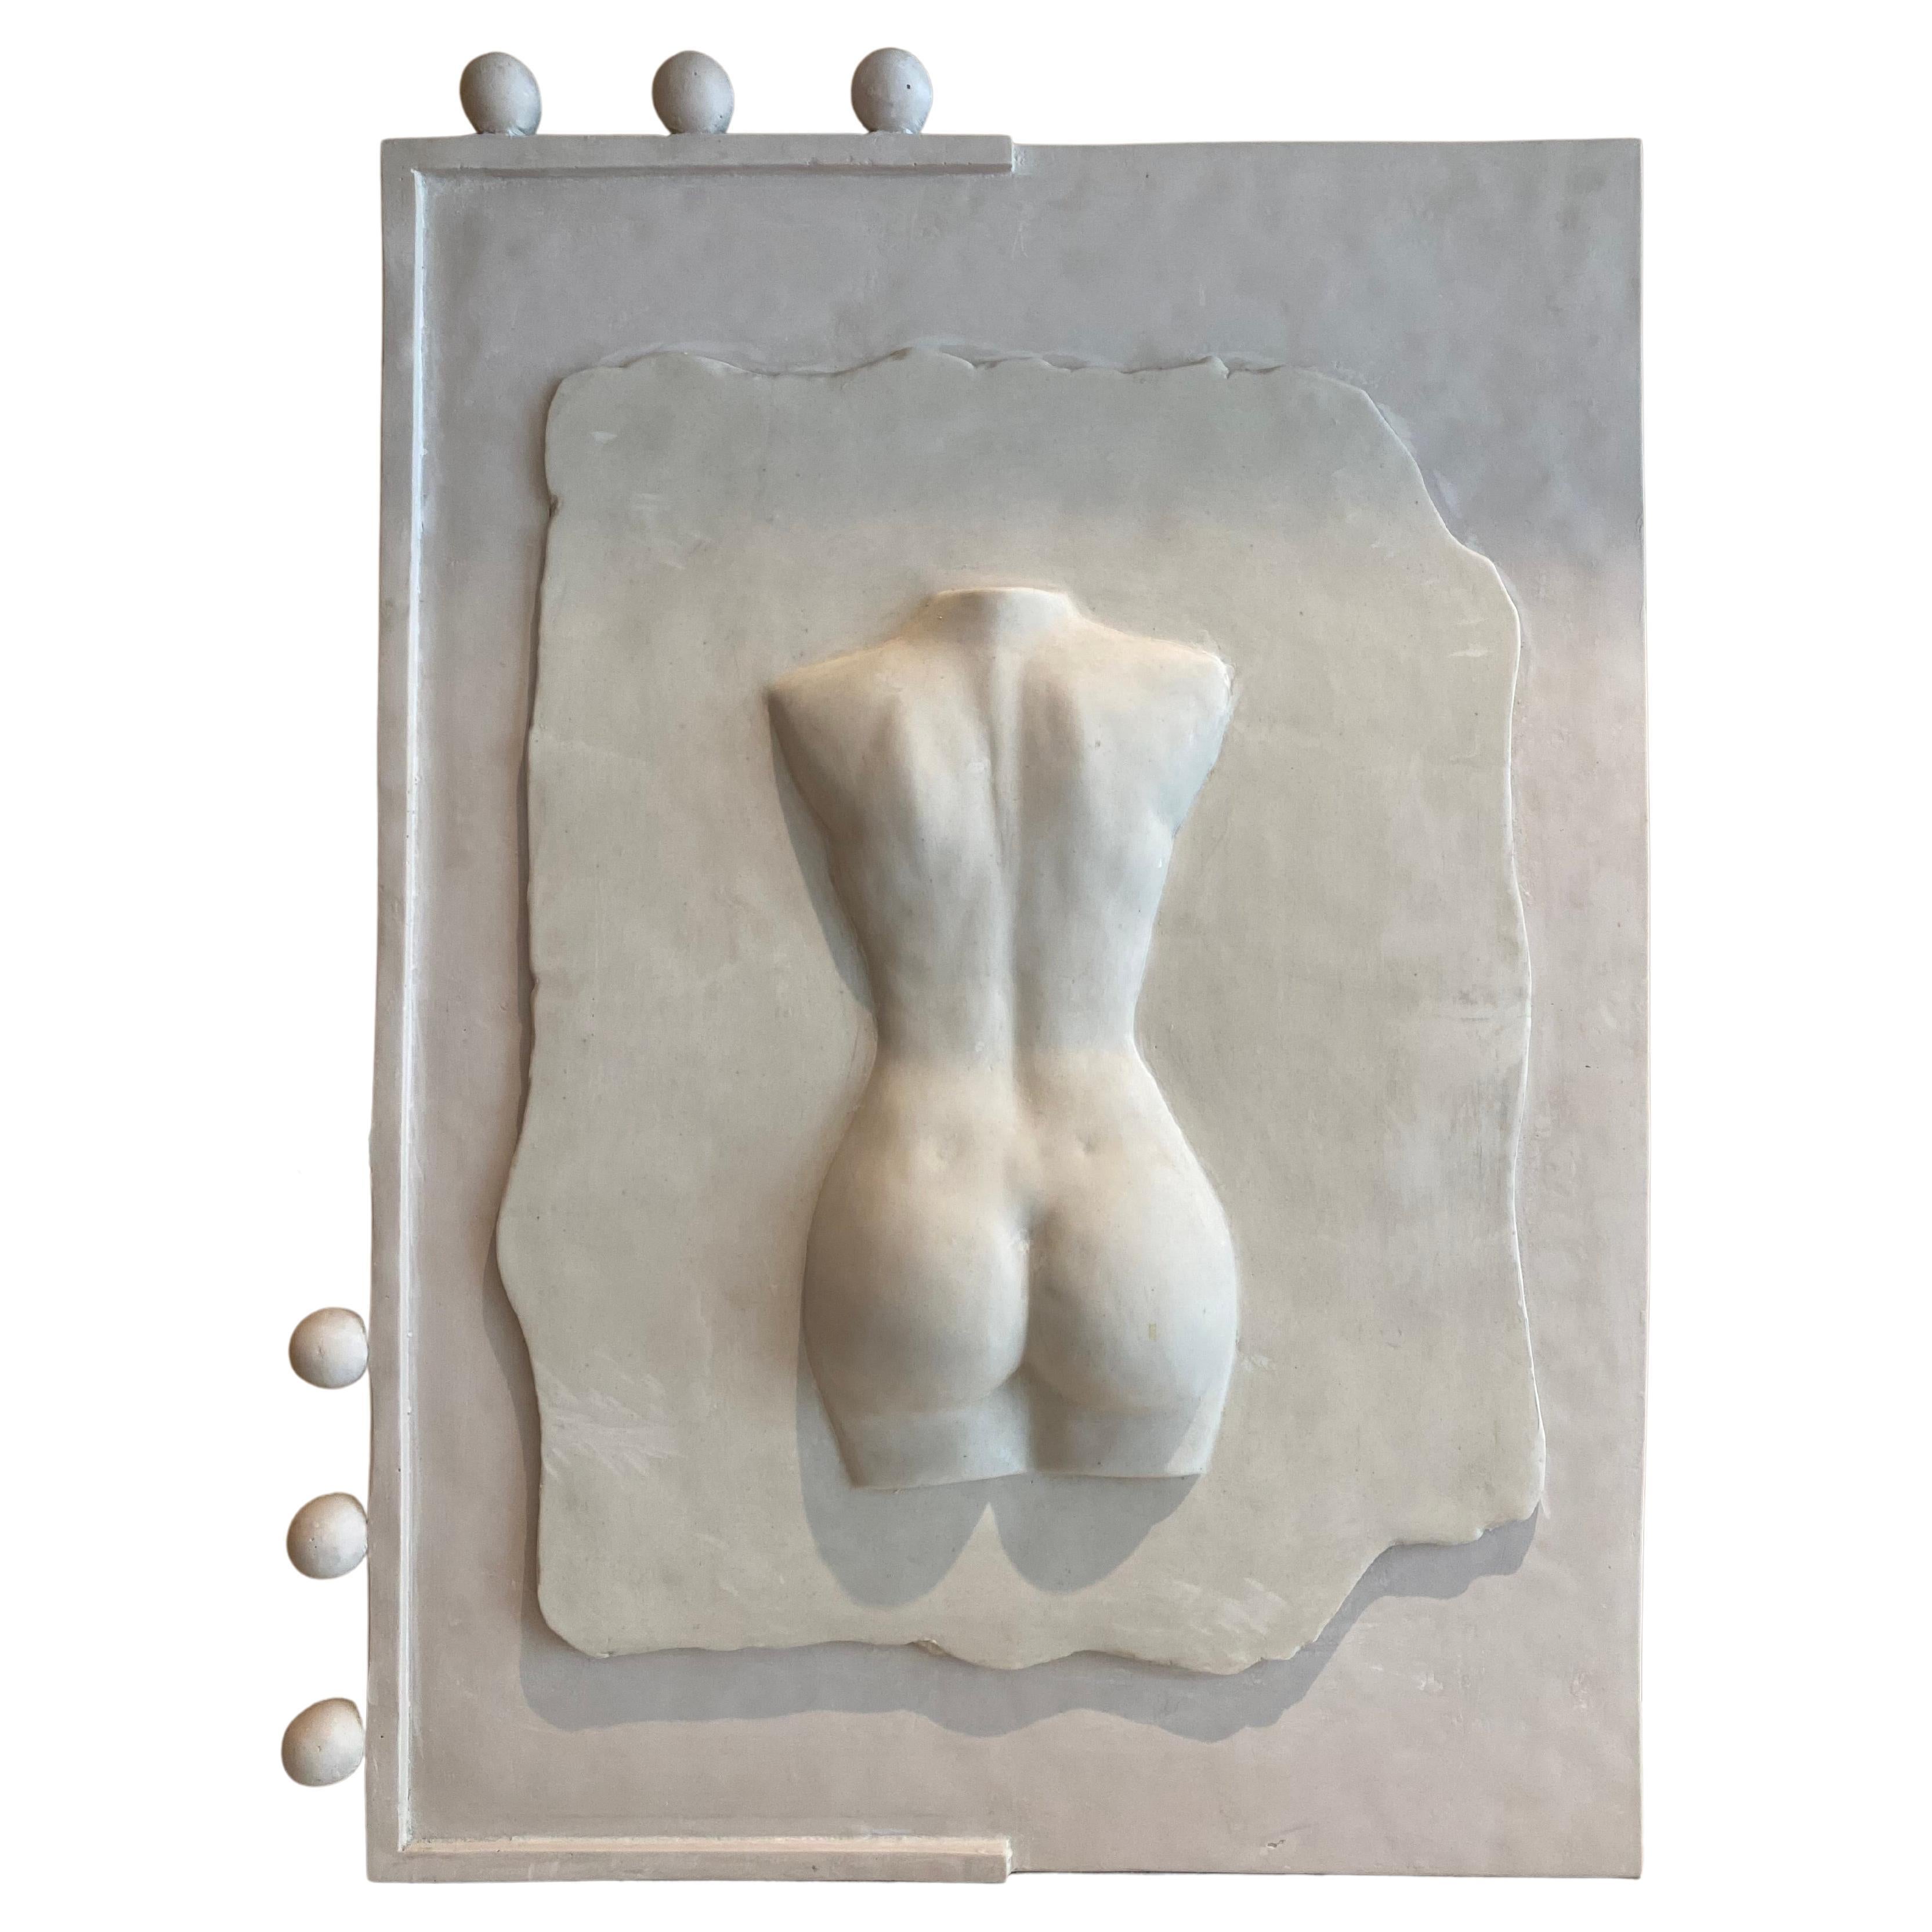 Female Backside Wall Art Sculpture- Hand Crafted Stone- Number 24